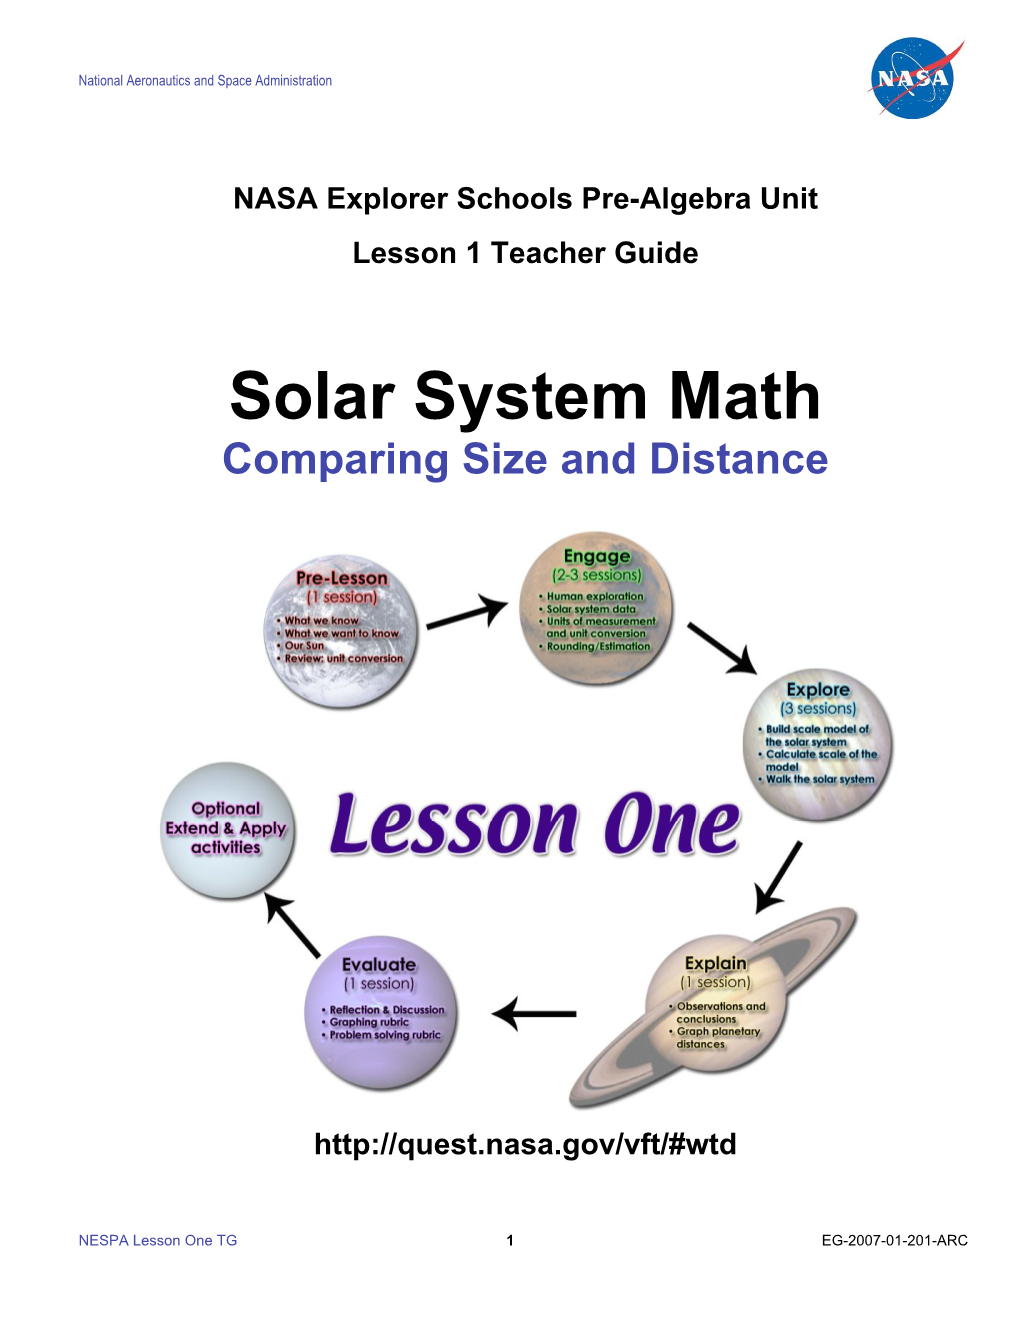 Solar System Math Comparing Size and Distance